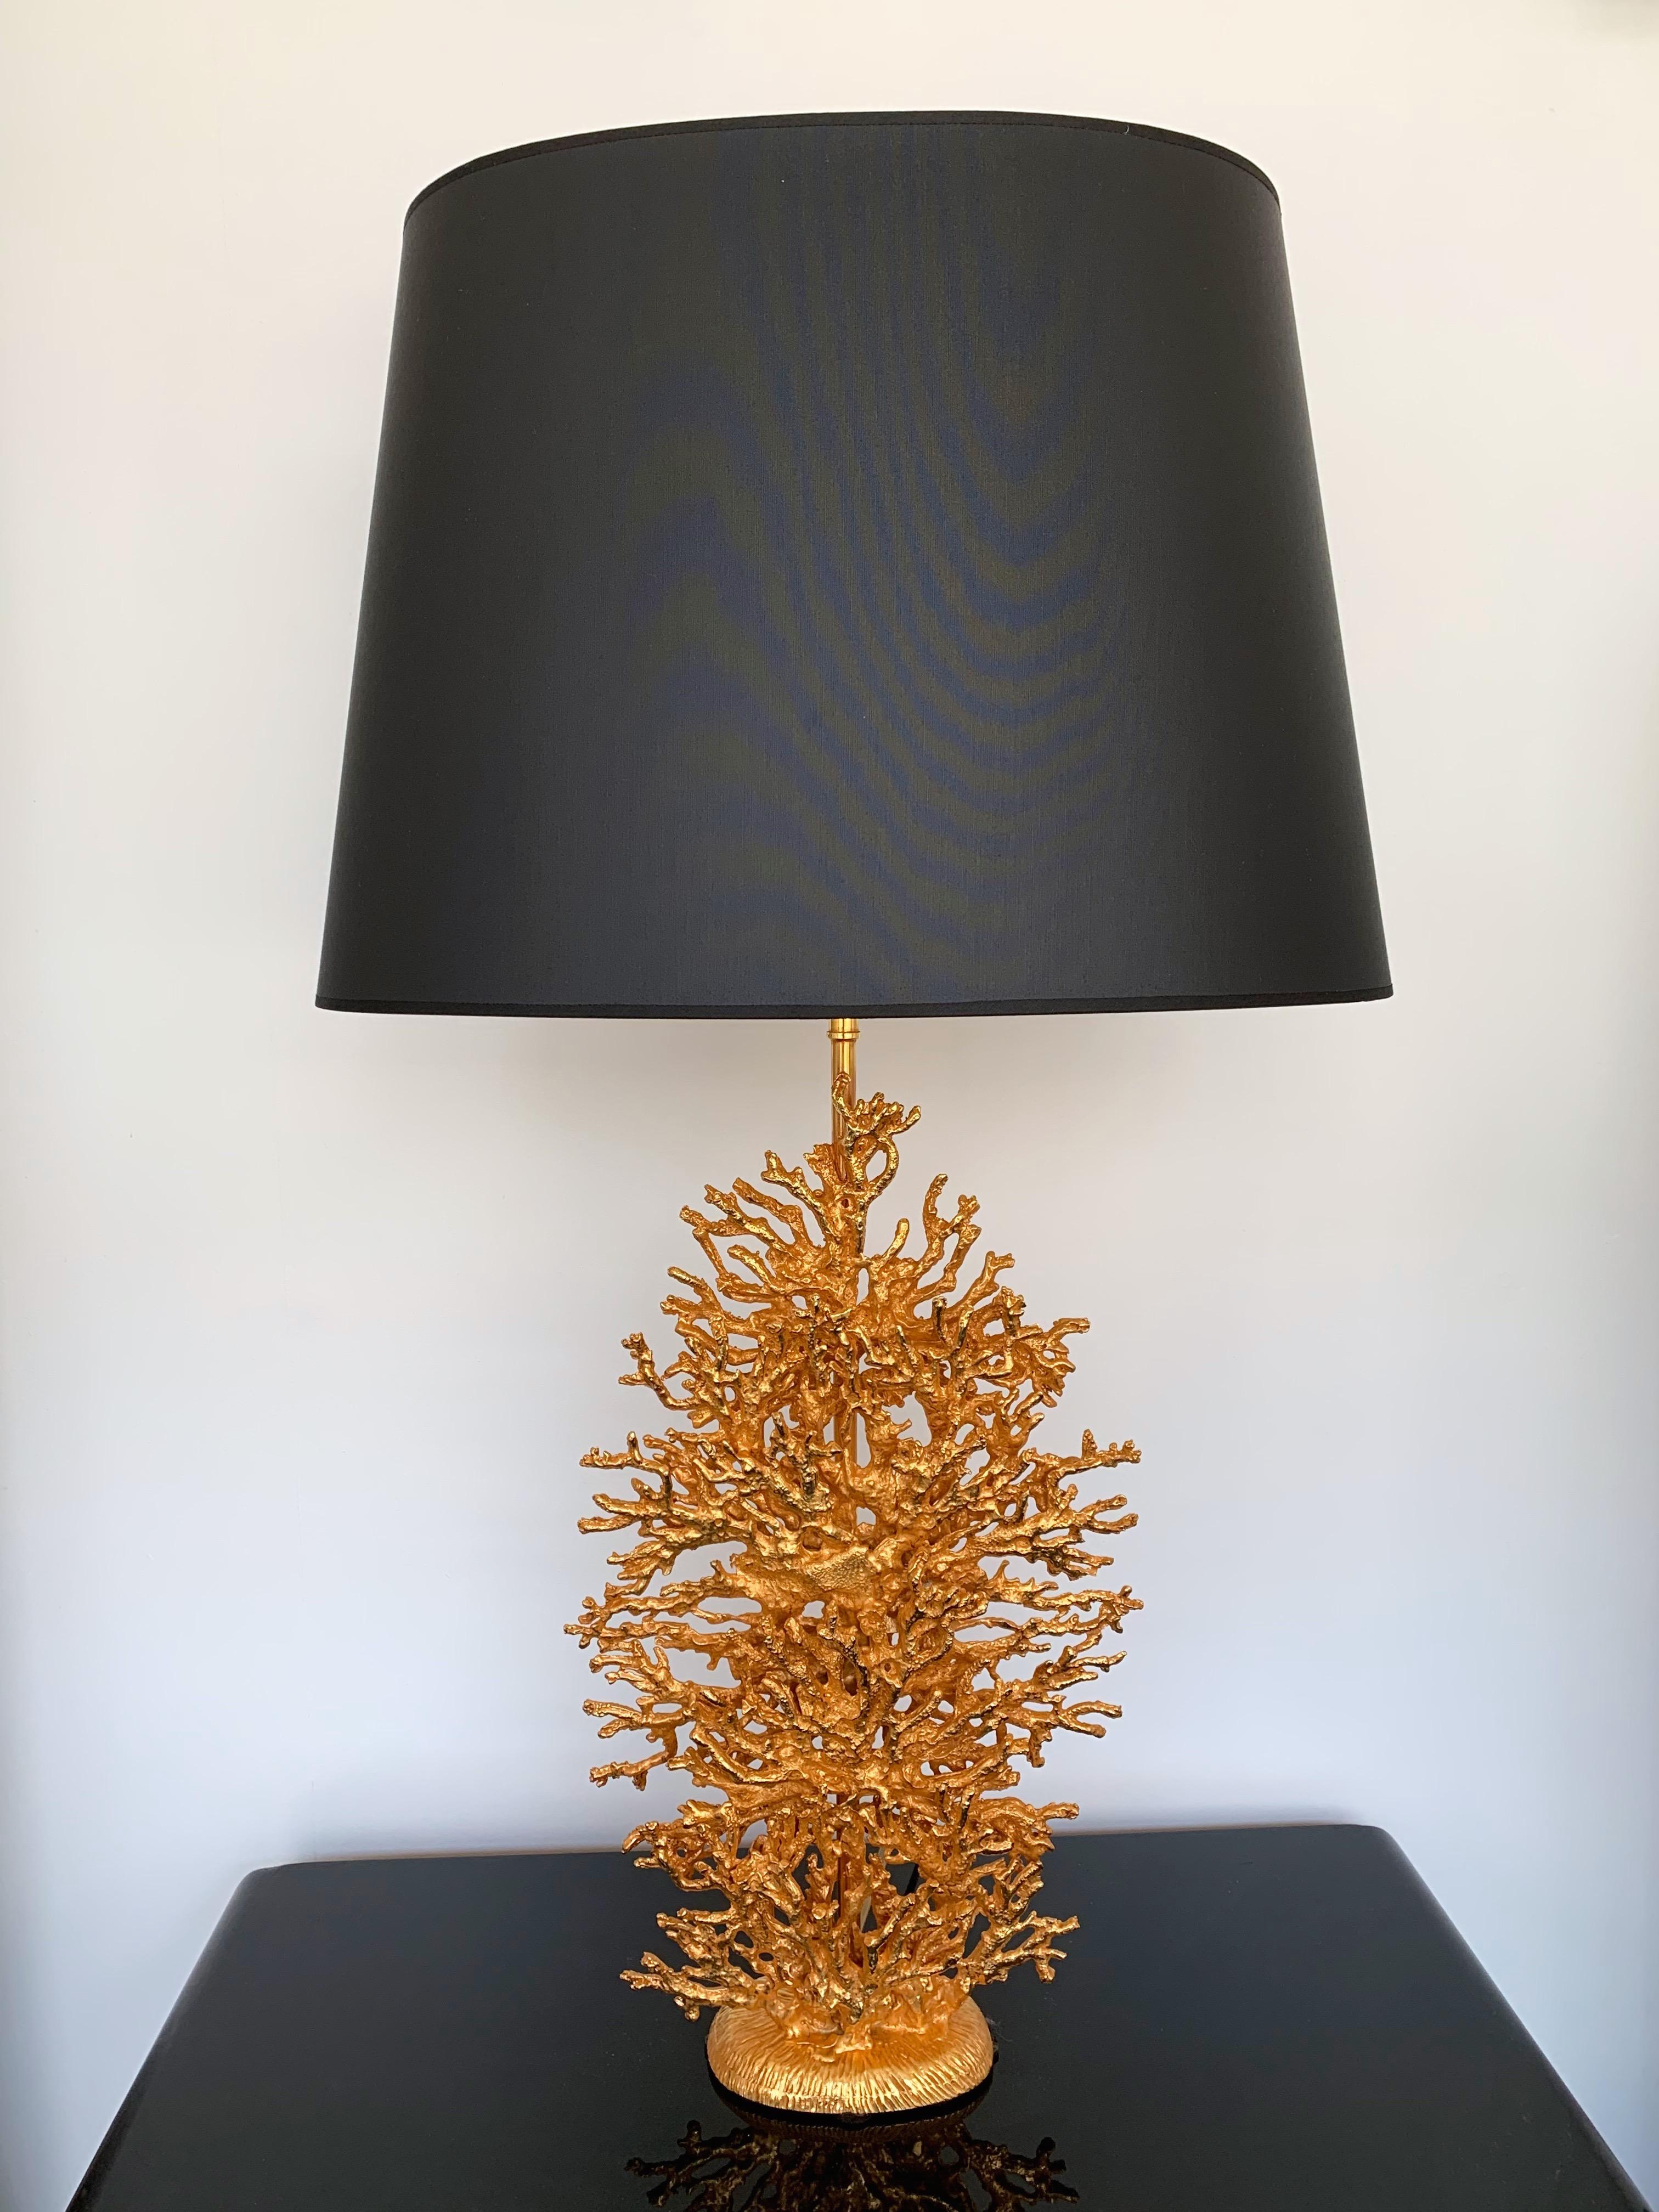 Pair of bedside or table lamps gilt metal style bronze model coral by the artist Stephane Galerneau. Height top of sculpture 42 cms. Galerneau is one of the artist who have worked for Fondica like Mathias, Pierre Casenove, Nicolas Dewael.